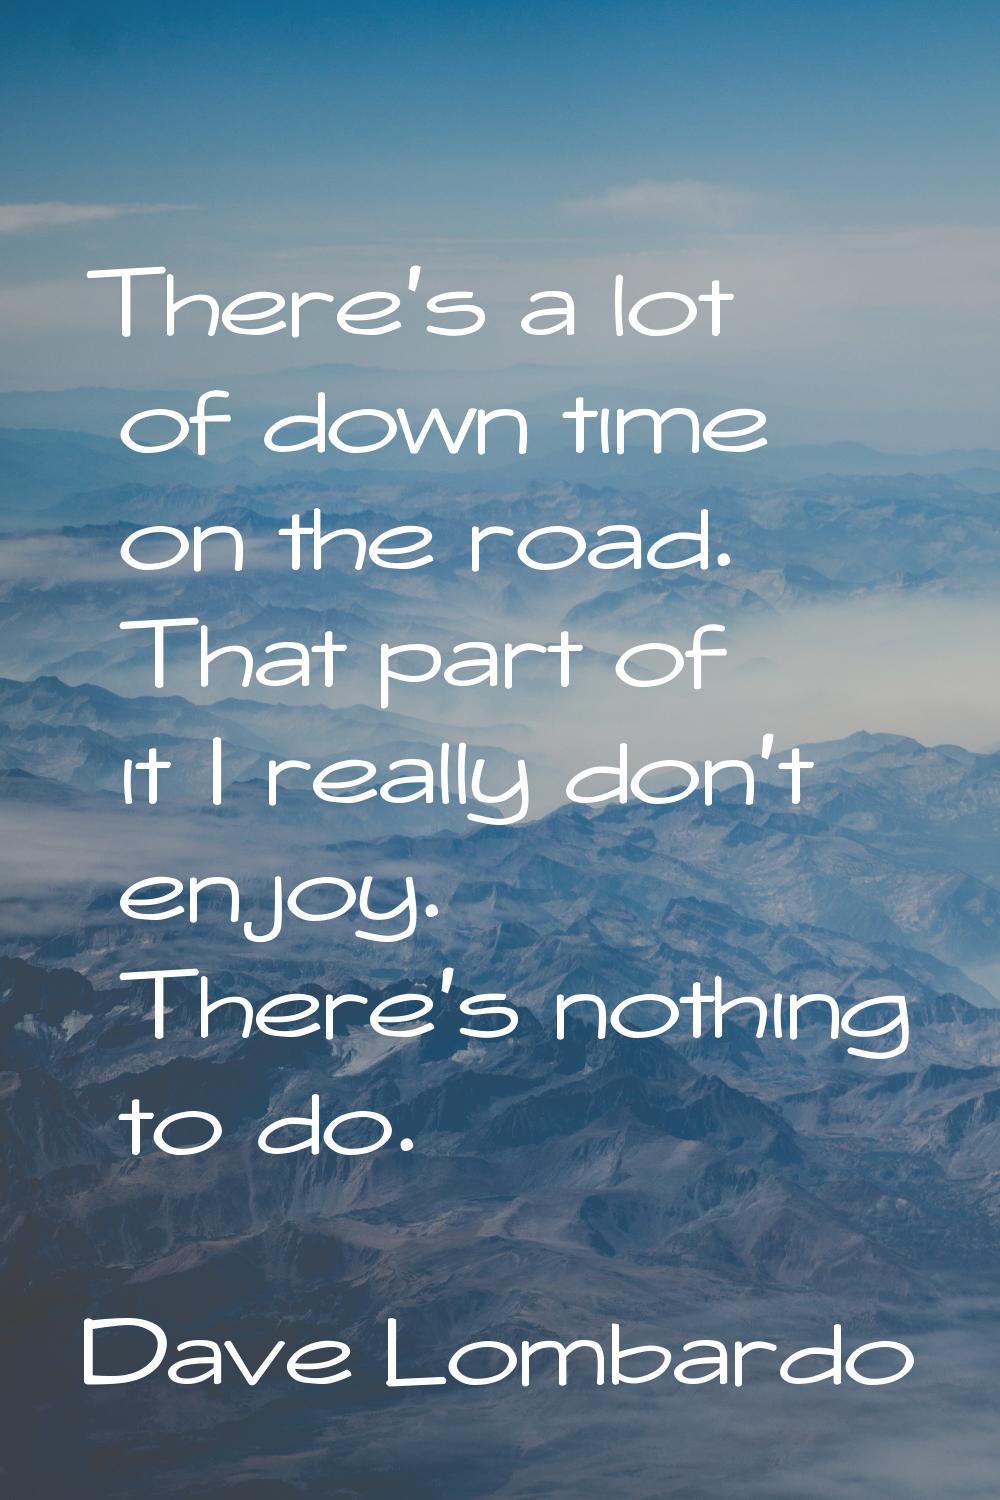 There's a lot of down time on the road. That part of it I really don't enjoy. There's nothing to do